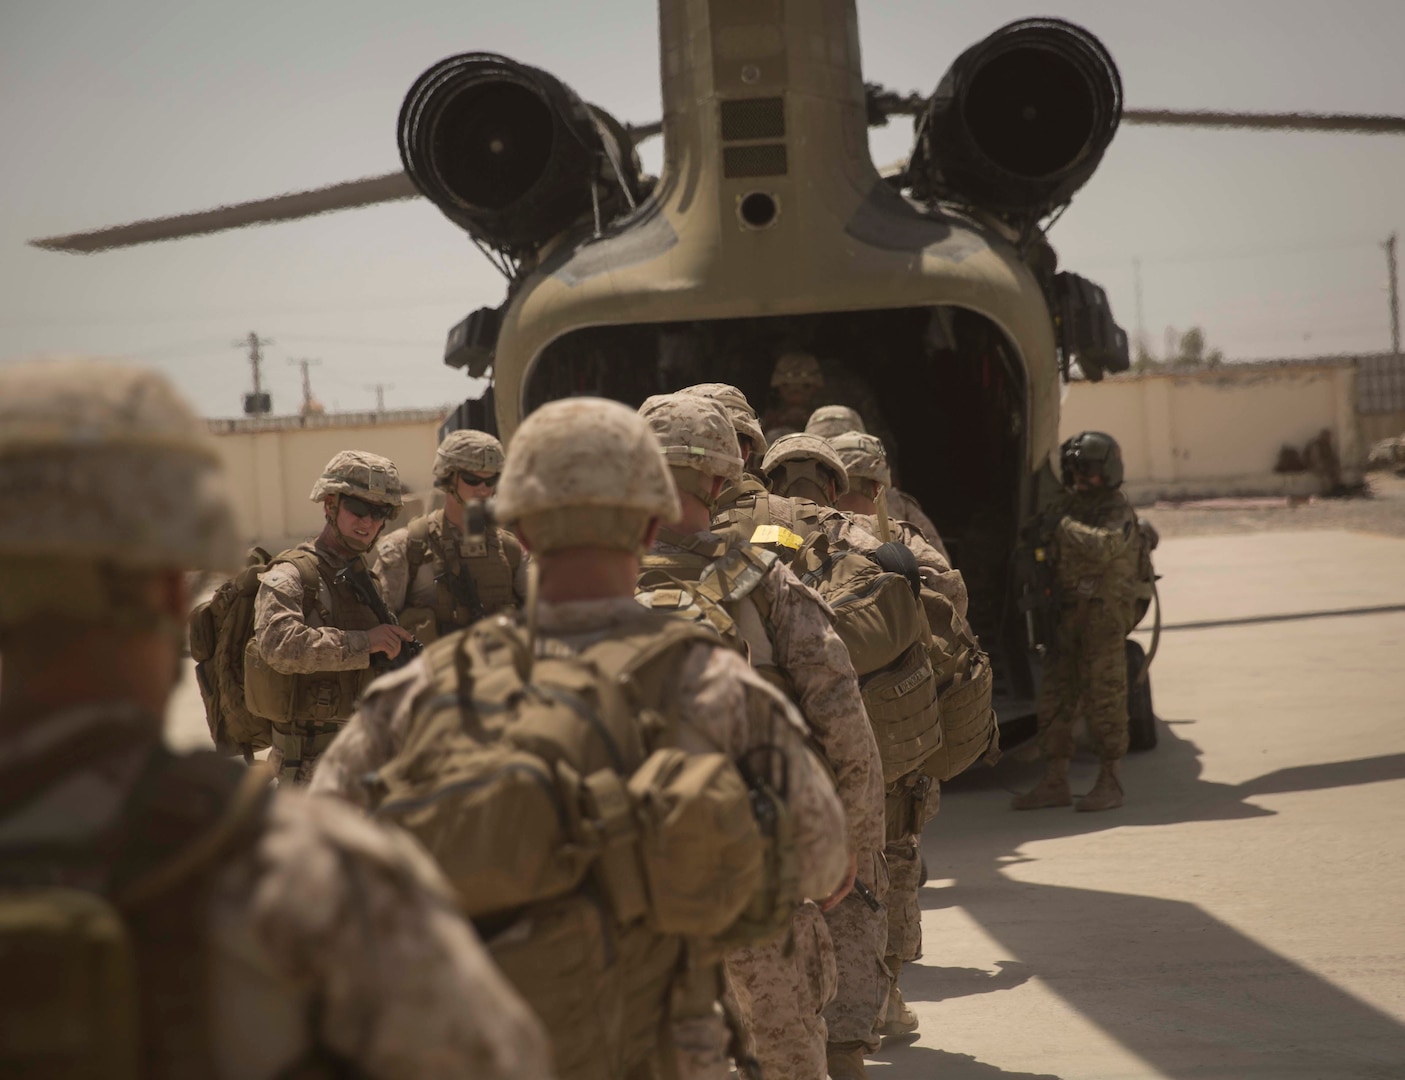 U.S. Marine advisors with Task Force Southwest embark on a CH-47 Chinook after a train, advise and assist mission at the Helmand Provincial Police Headquarters in Lashkar Gah, Afghanistan, July 9, 2017. This mission provided an opportunity for advisors to meet with their counterparts, review the security posture at the PHQ and ensure that Afghan National Defense and Security Forces have an effective defense of Lashkar Gah. (U.S. Marine Corps photo by Sgt. Justin T. Updegraff)